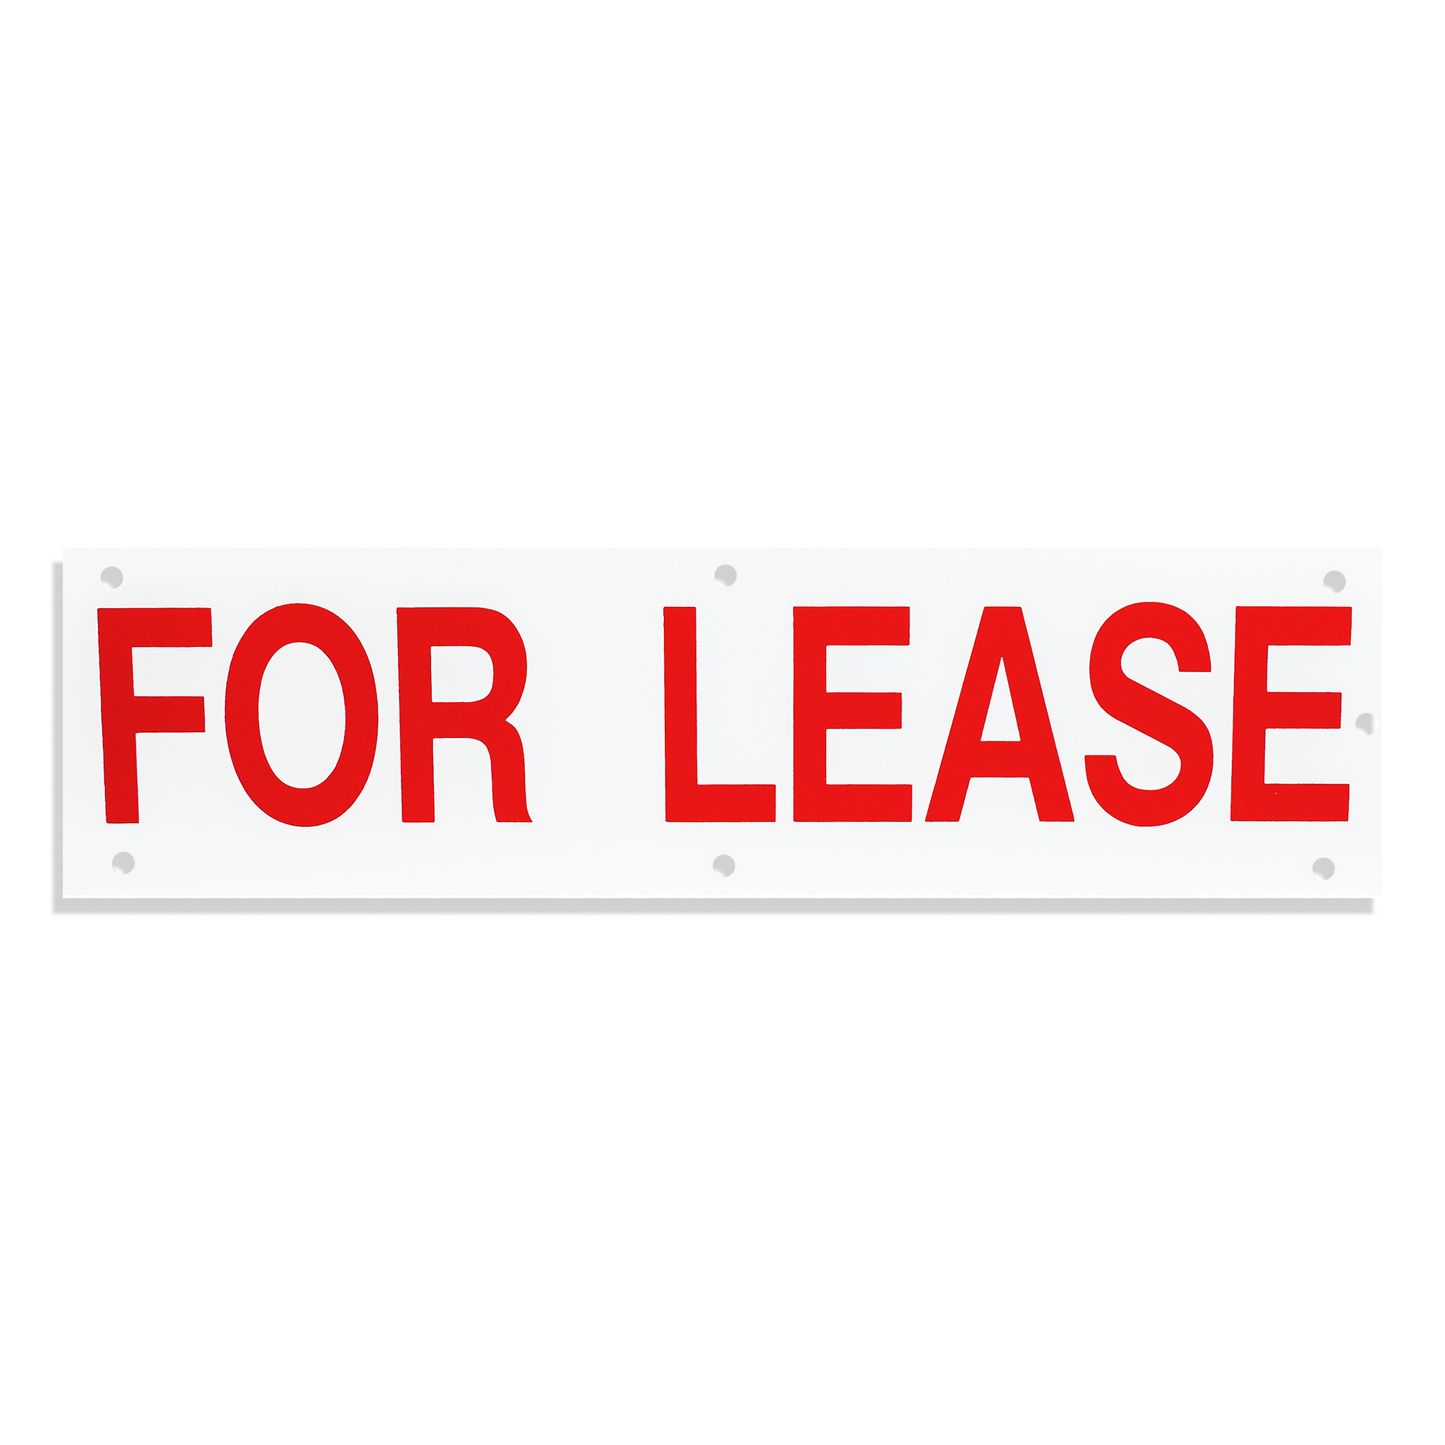 Rider - For Lease Rider   